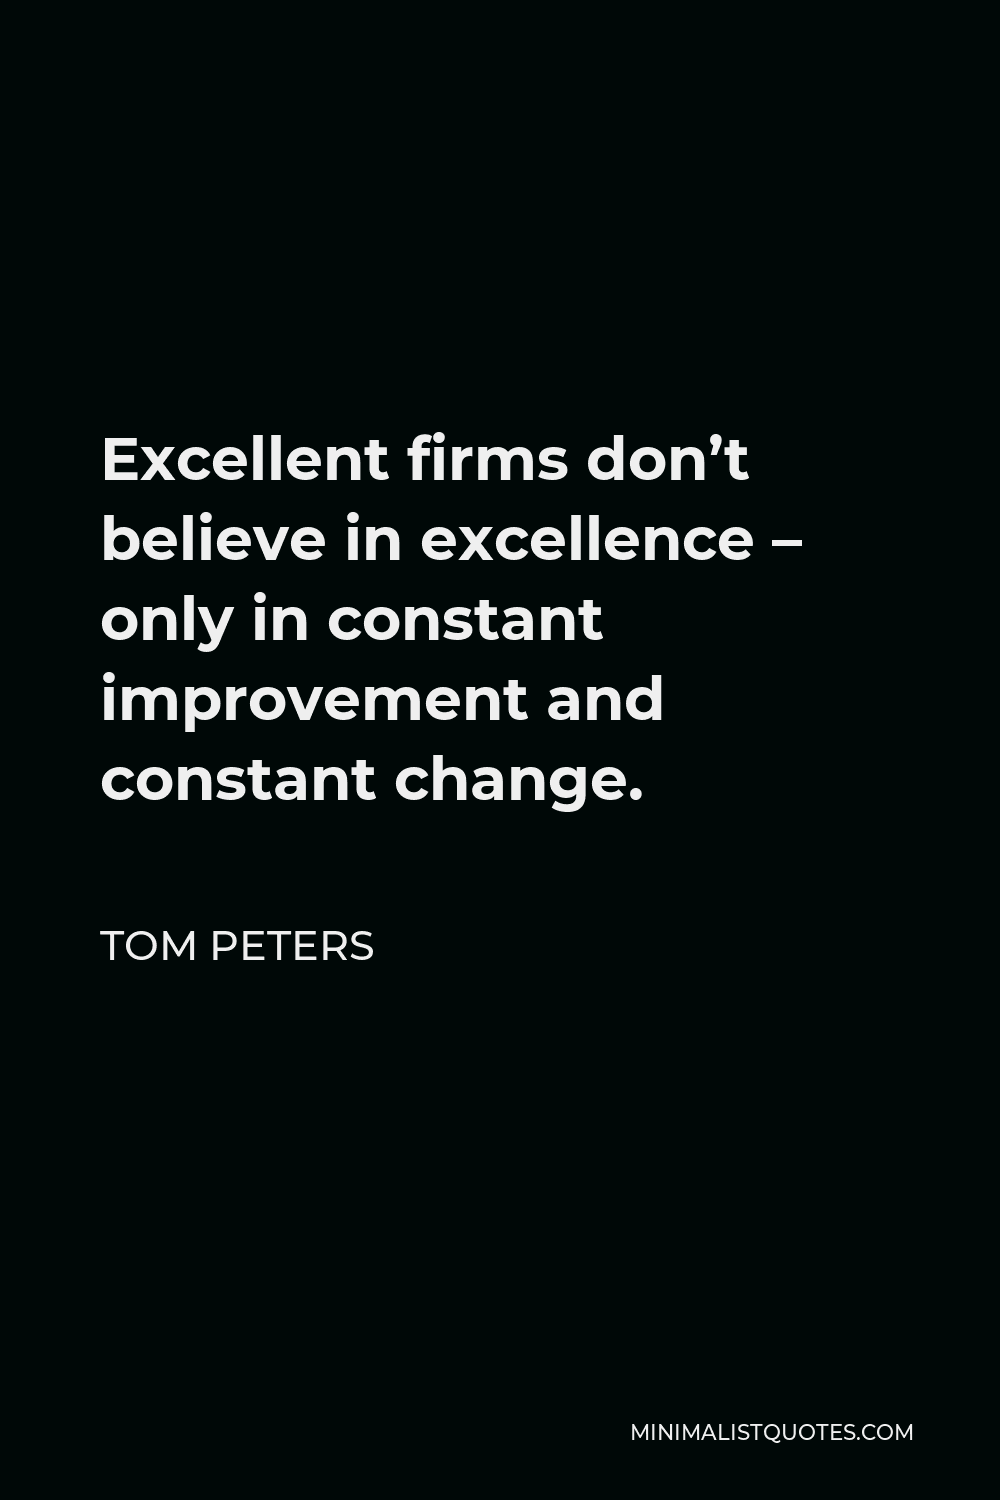 Tom Peters Quote - Excellent firms don’t believe in excellence – only in constant improvement and constant change.